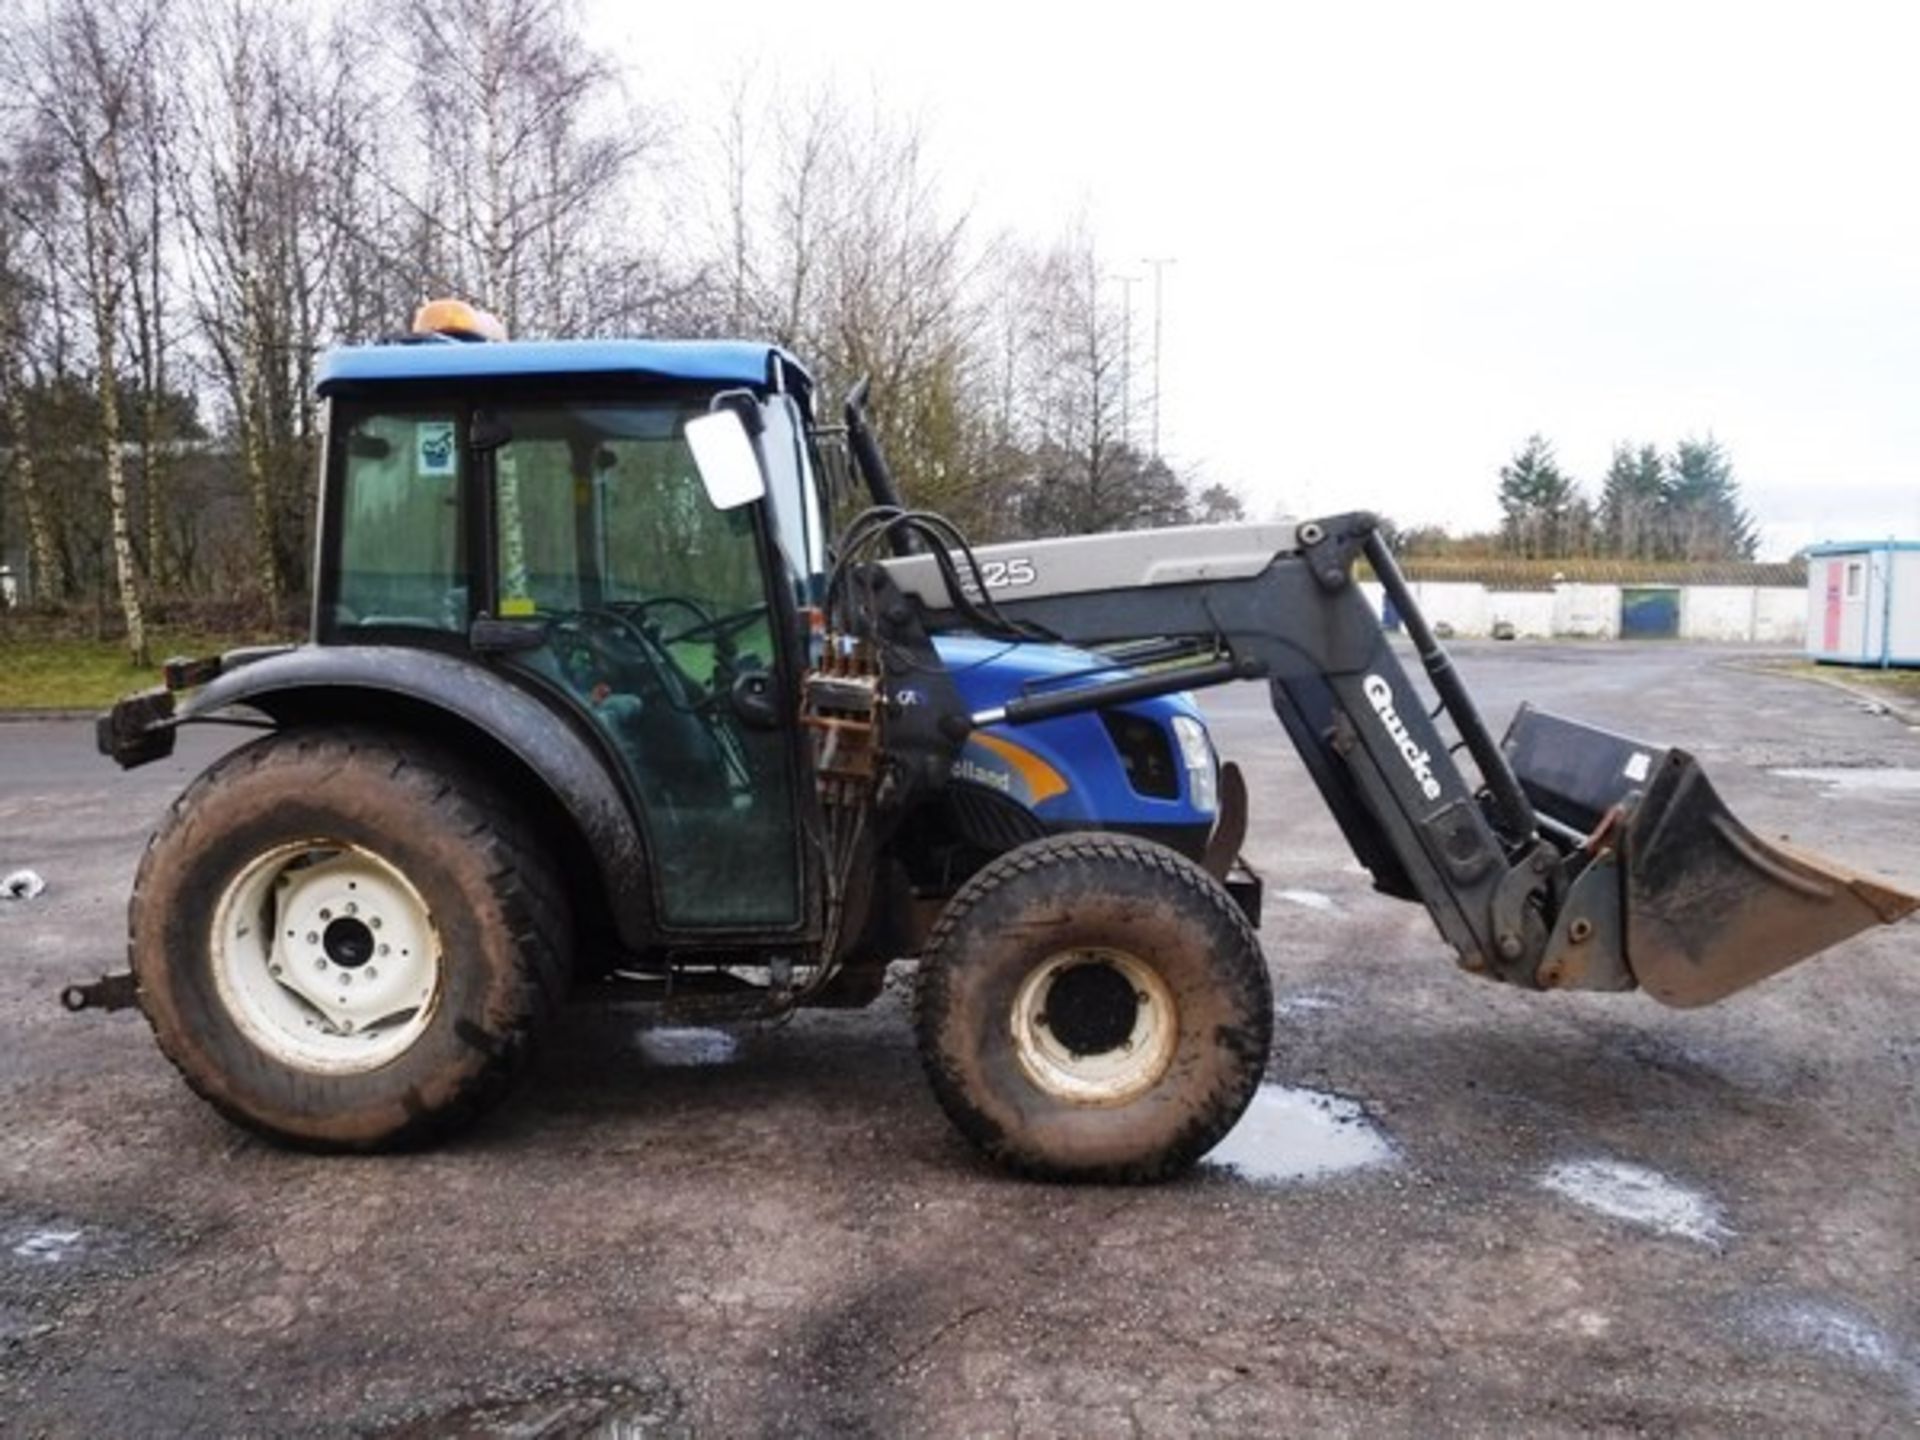 2008 NEW HOLLAND TN60 TRACTOR. REG NO SP08 DWY. SN 111054. GVW(TONNES) 4497, 3062HRS (NOT VERIFIED) - Image 39 of 40